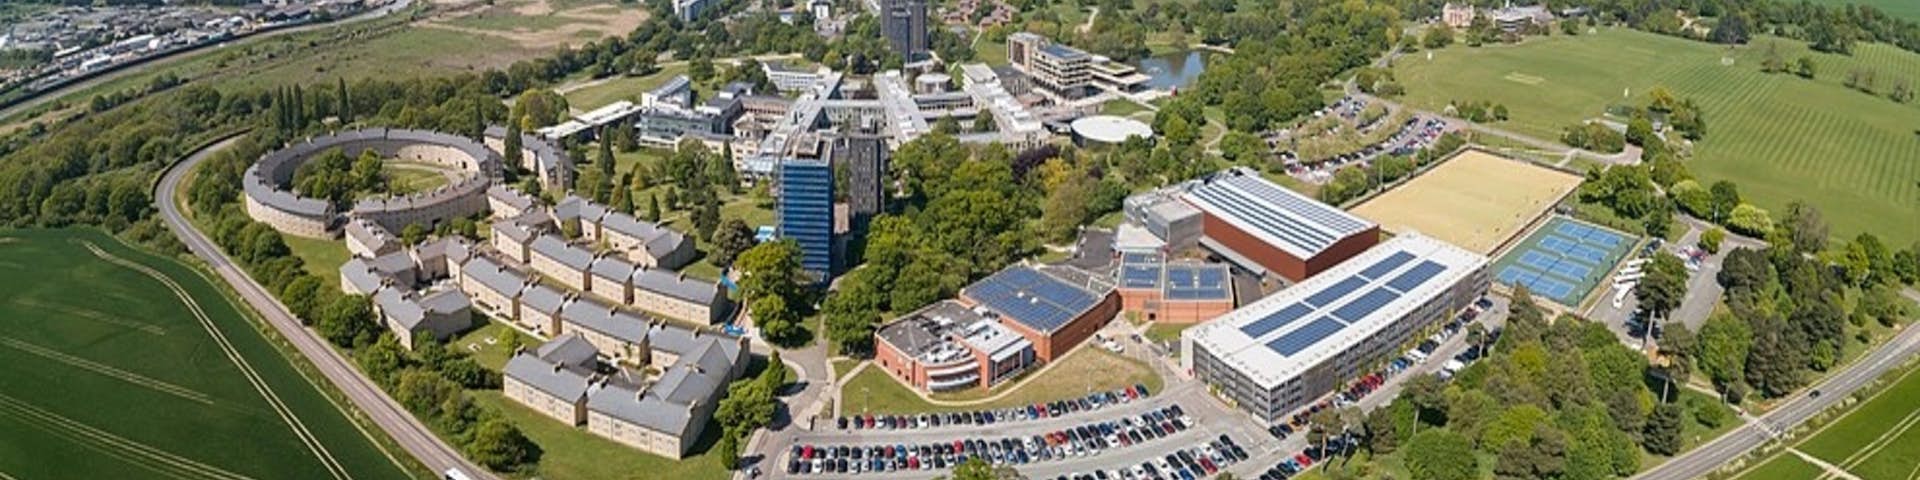 Financial Economics and Accounting at University of Essex 